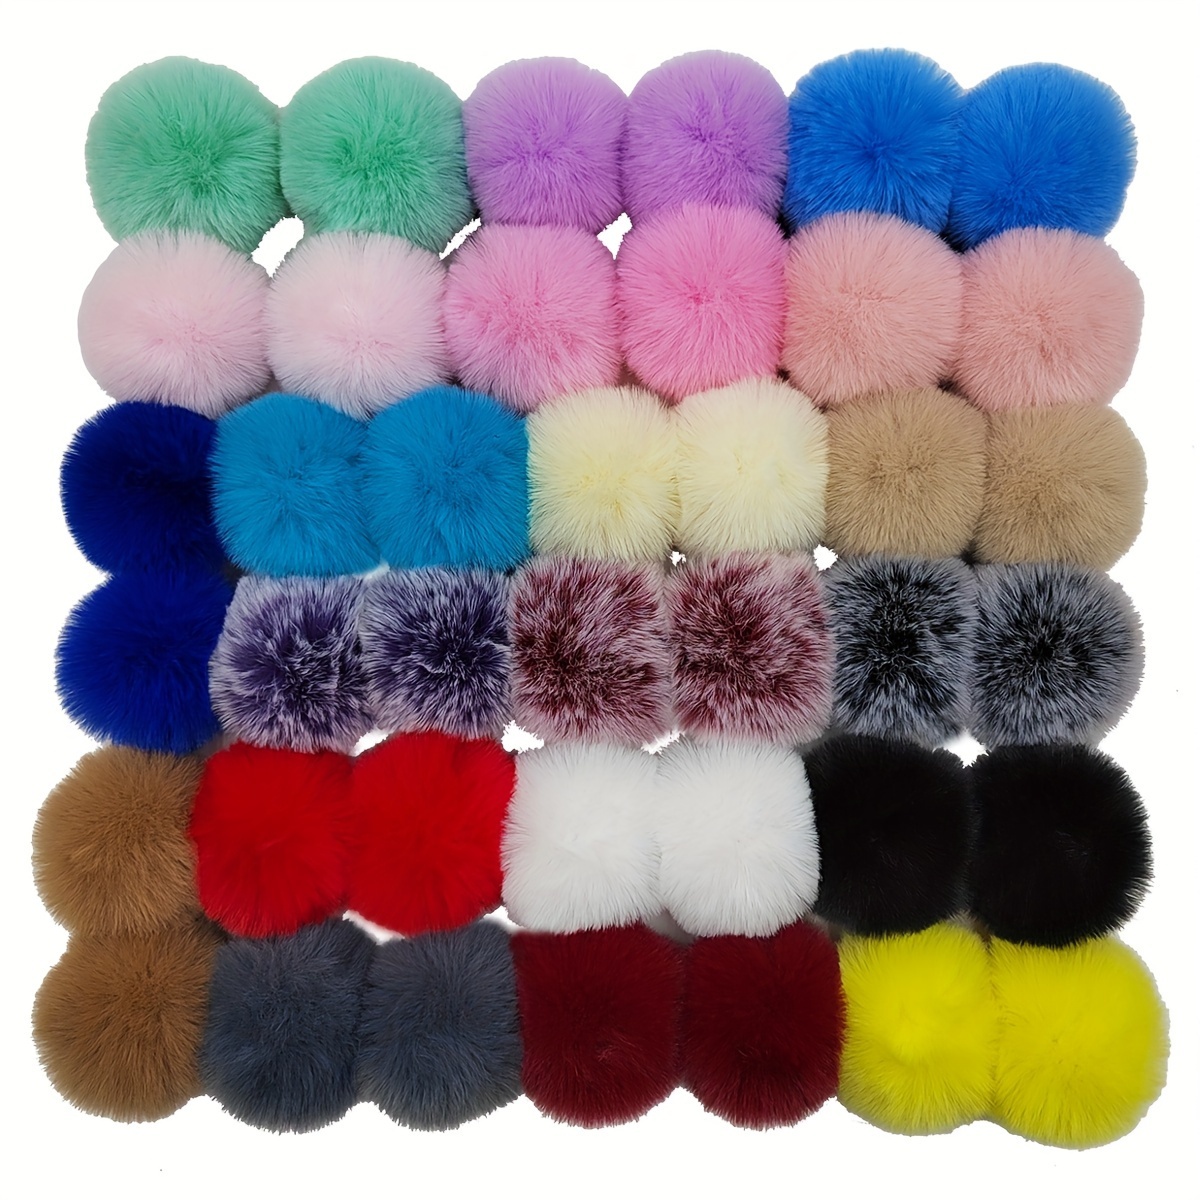 

20-pack Faux Fur Pom Poms - 2.76 Inch Fluffy Craft Pompoms With Elastic Loop For Removable Knit Hat, Scarf, Gloves, Bag Accessories - Polyester Material For Diy Crafting